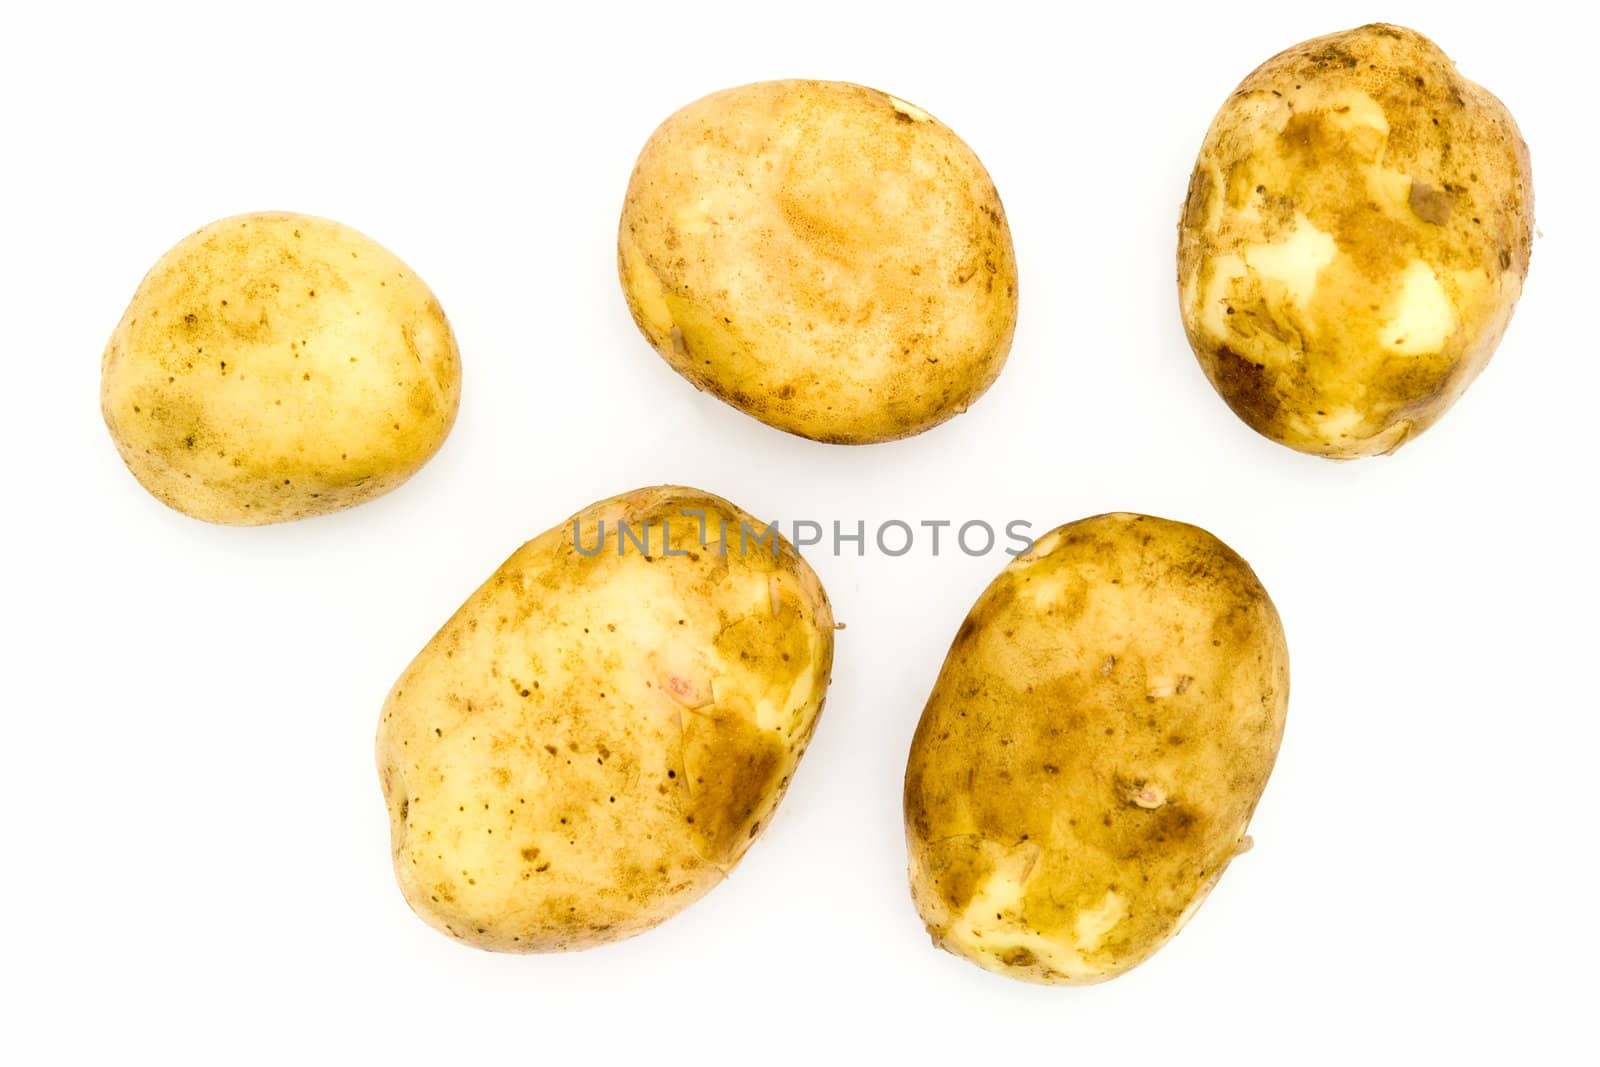 Some big potatoes on a white background.